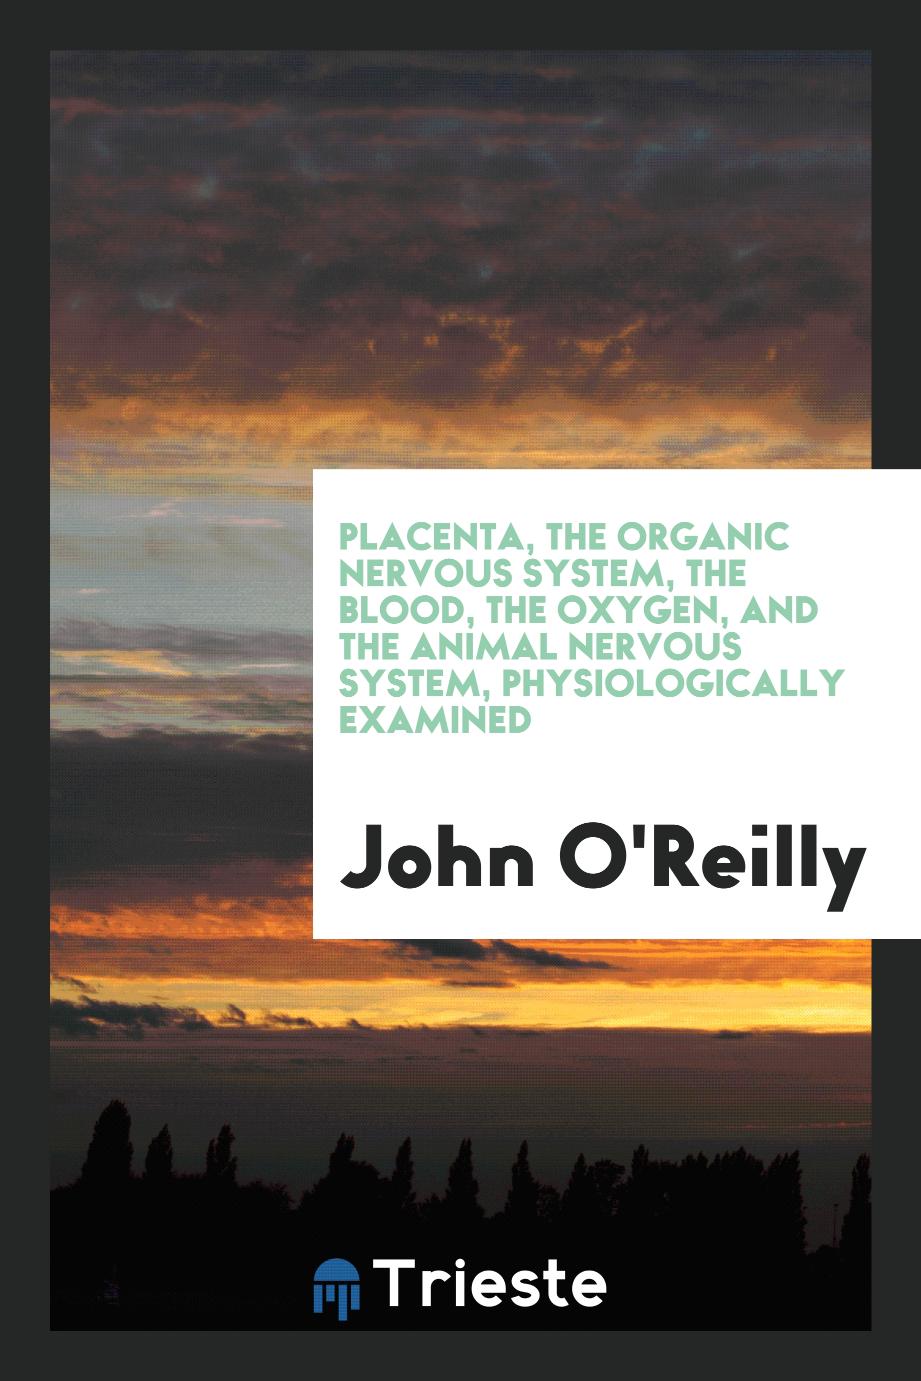 Placenta, the Organic Nervous System, the Blood, the Oxygen, and the Animal Nervous System, Physiologically Examined